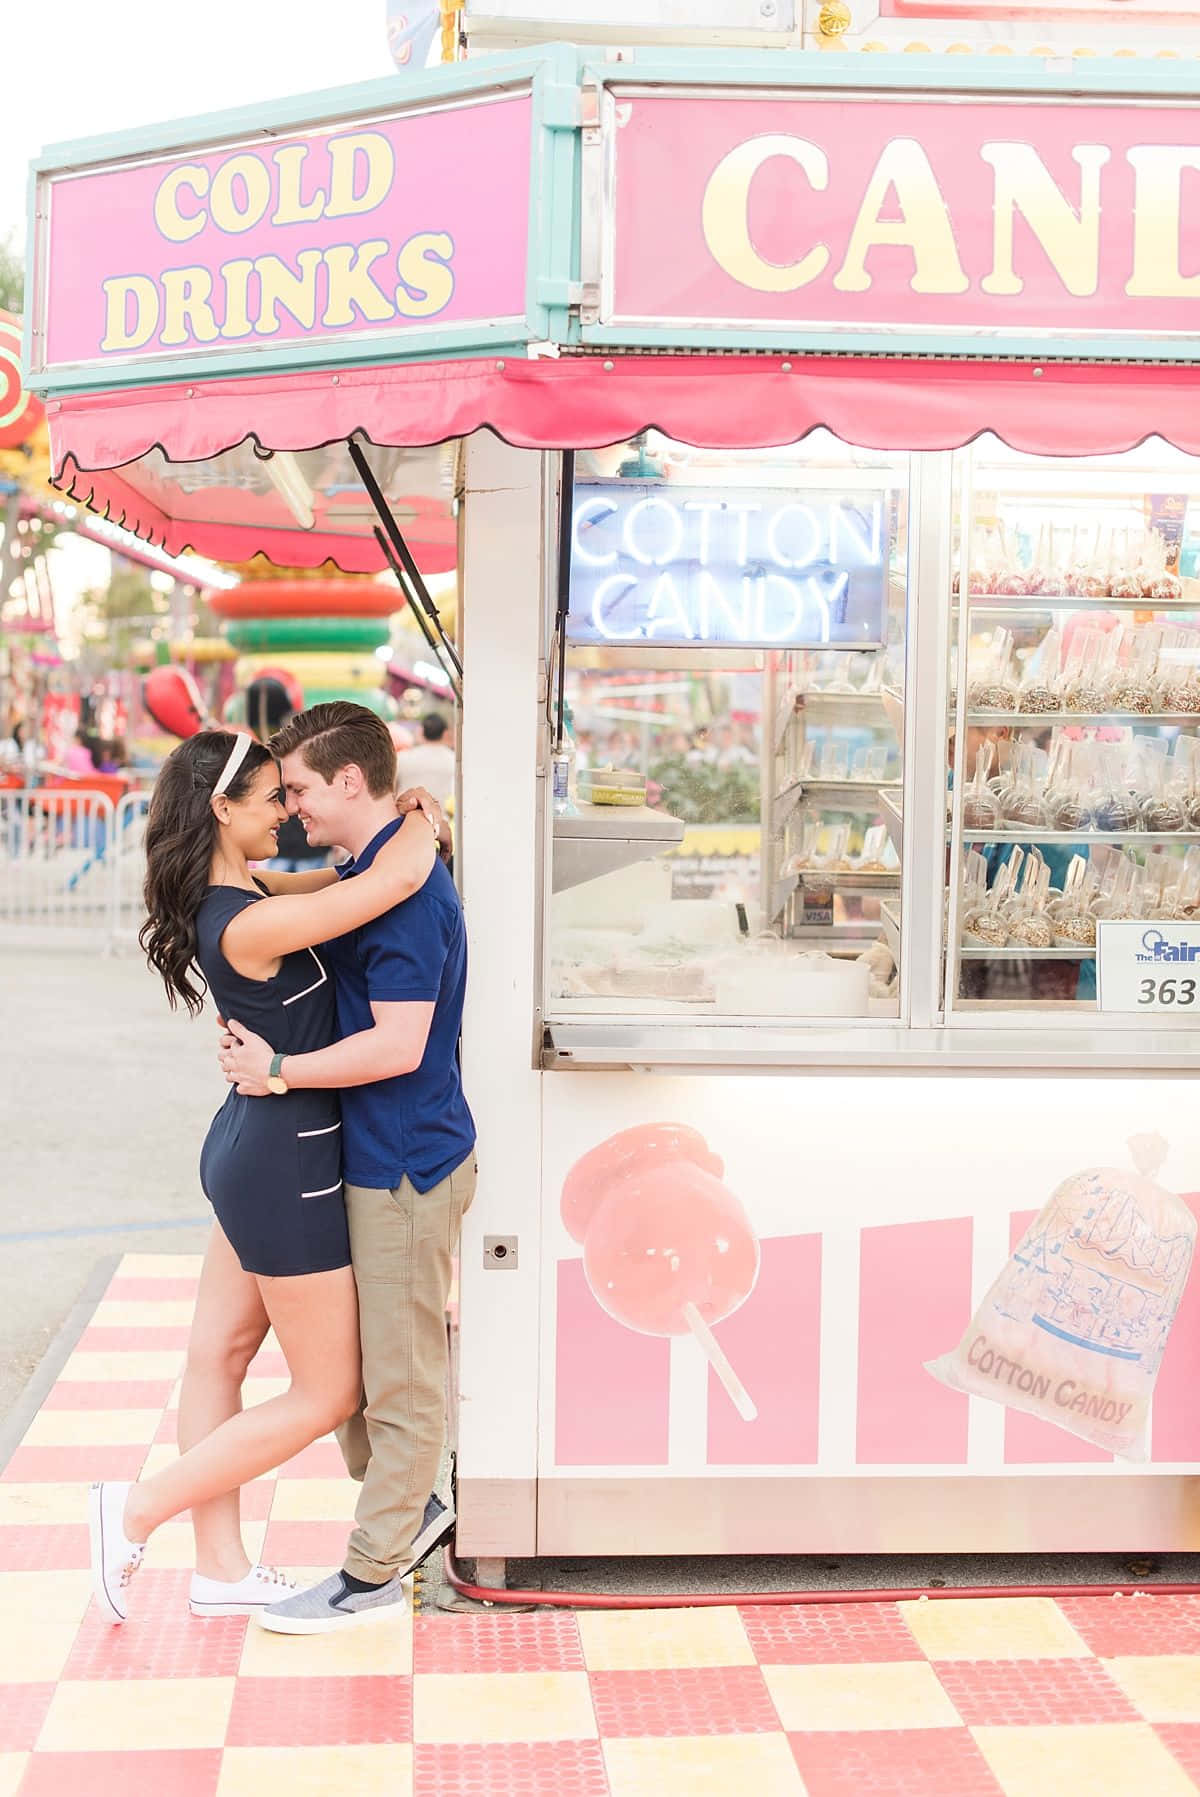 Couple Kissing In Front Of Carnival Cart Picture